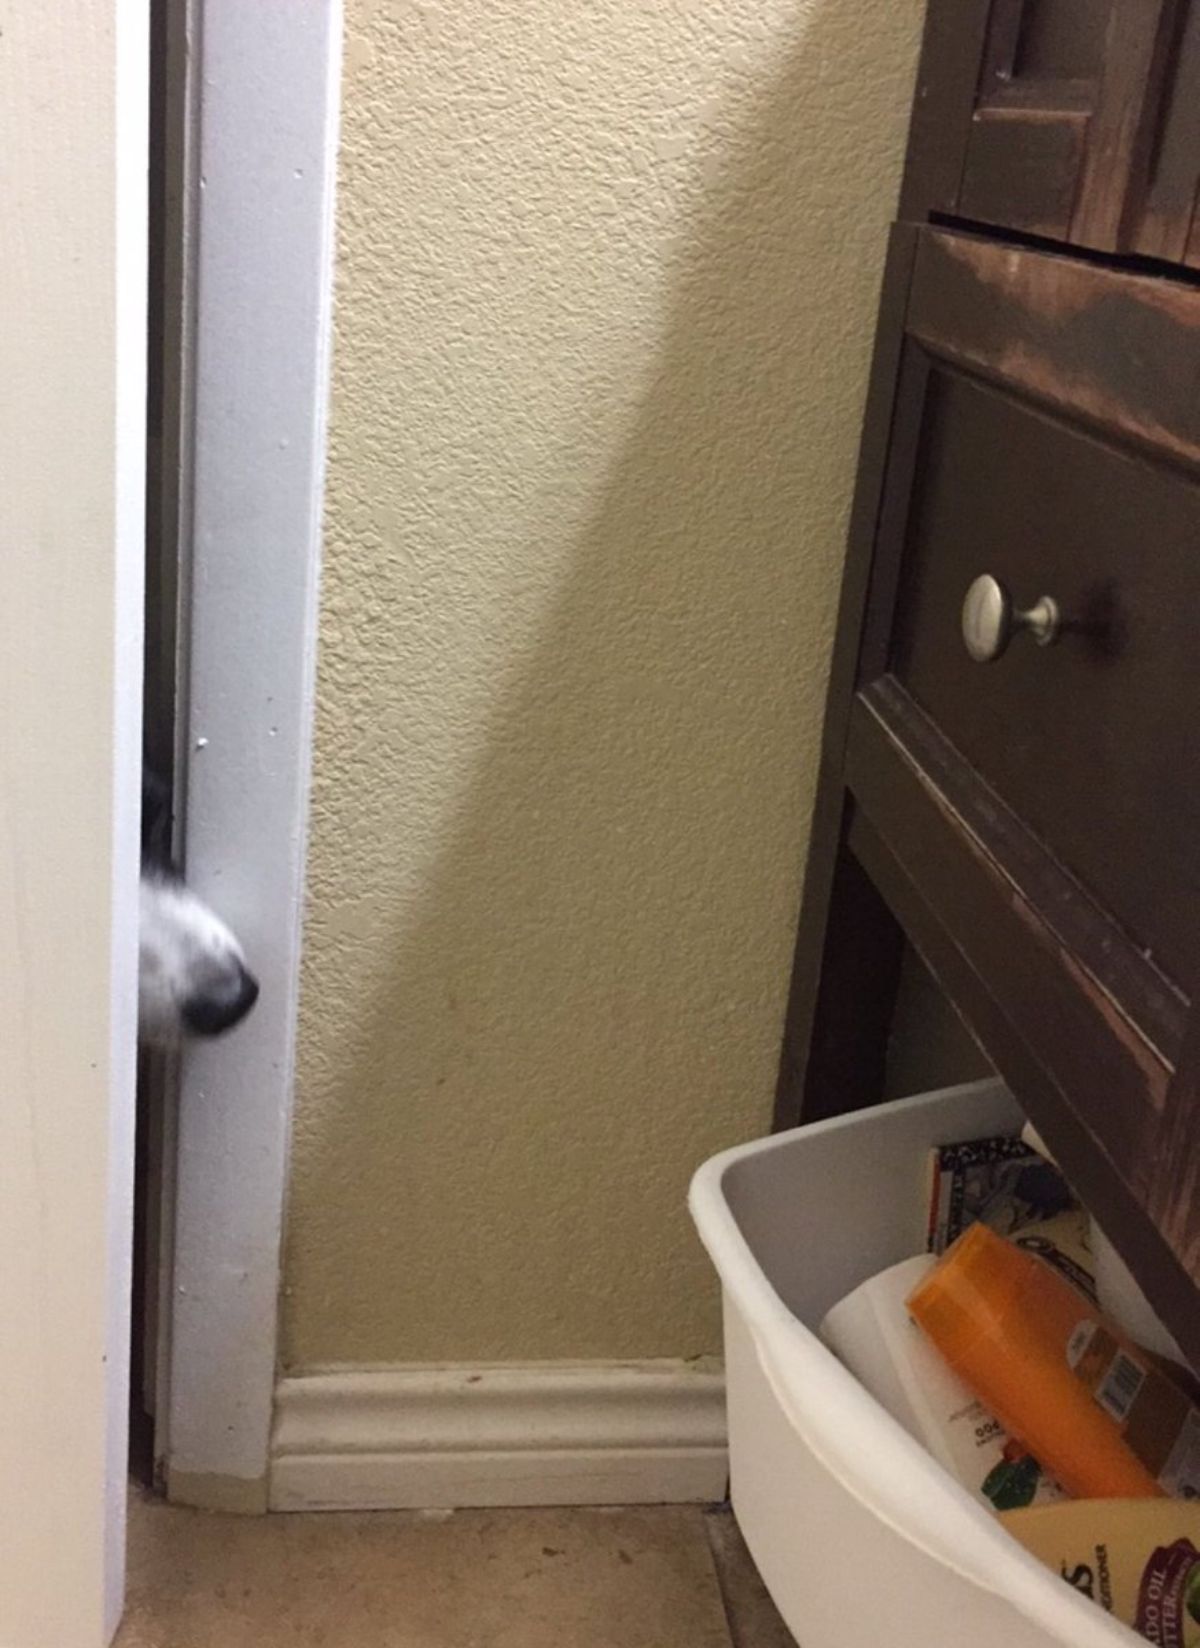 a dog nose sticking into the room behind a door